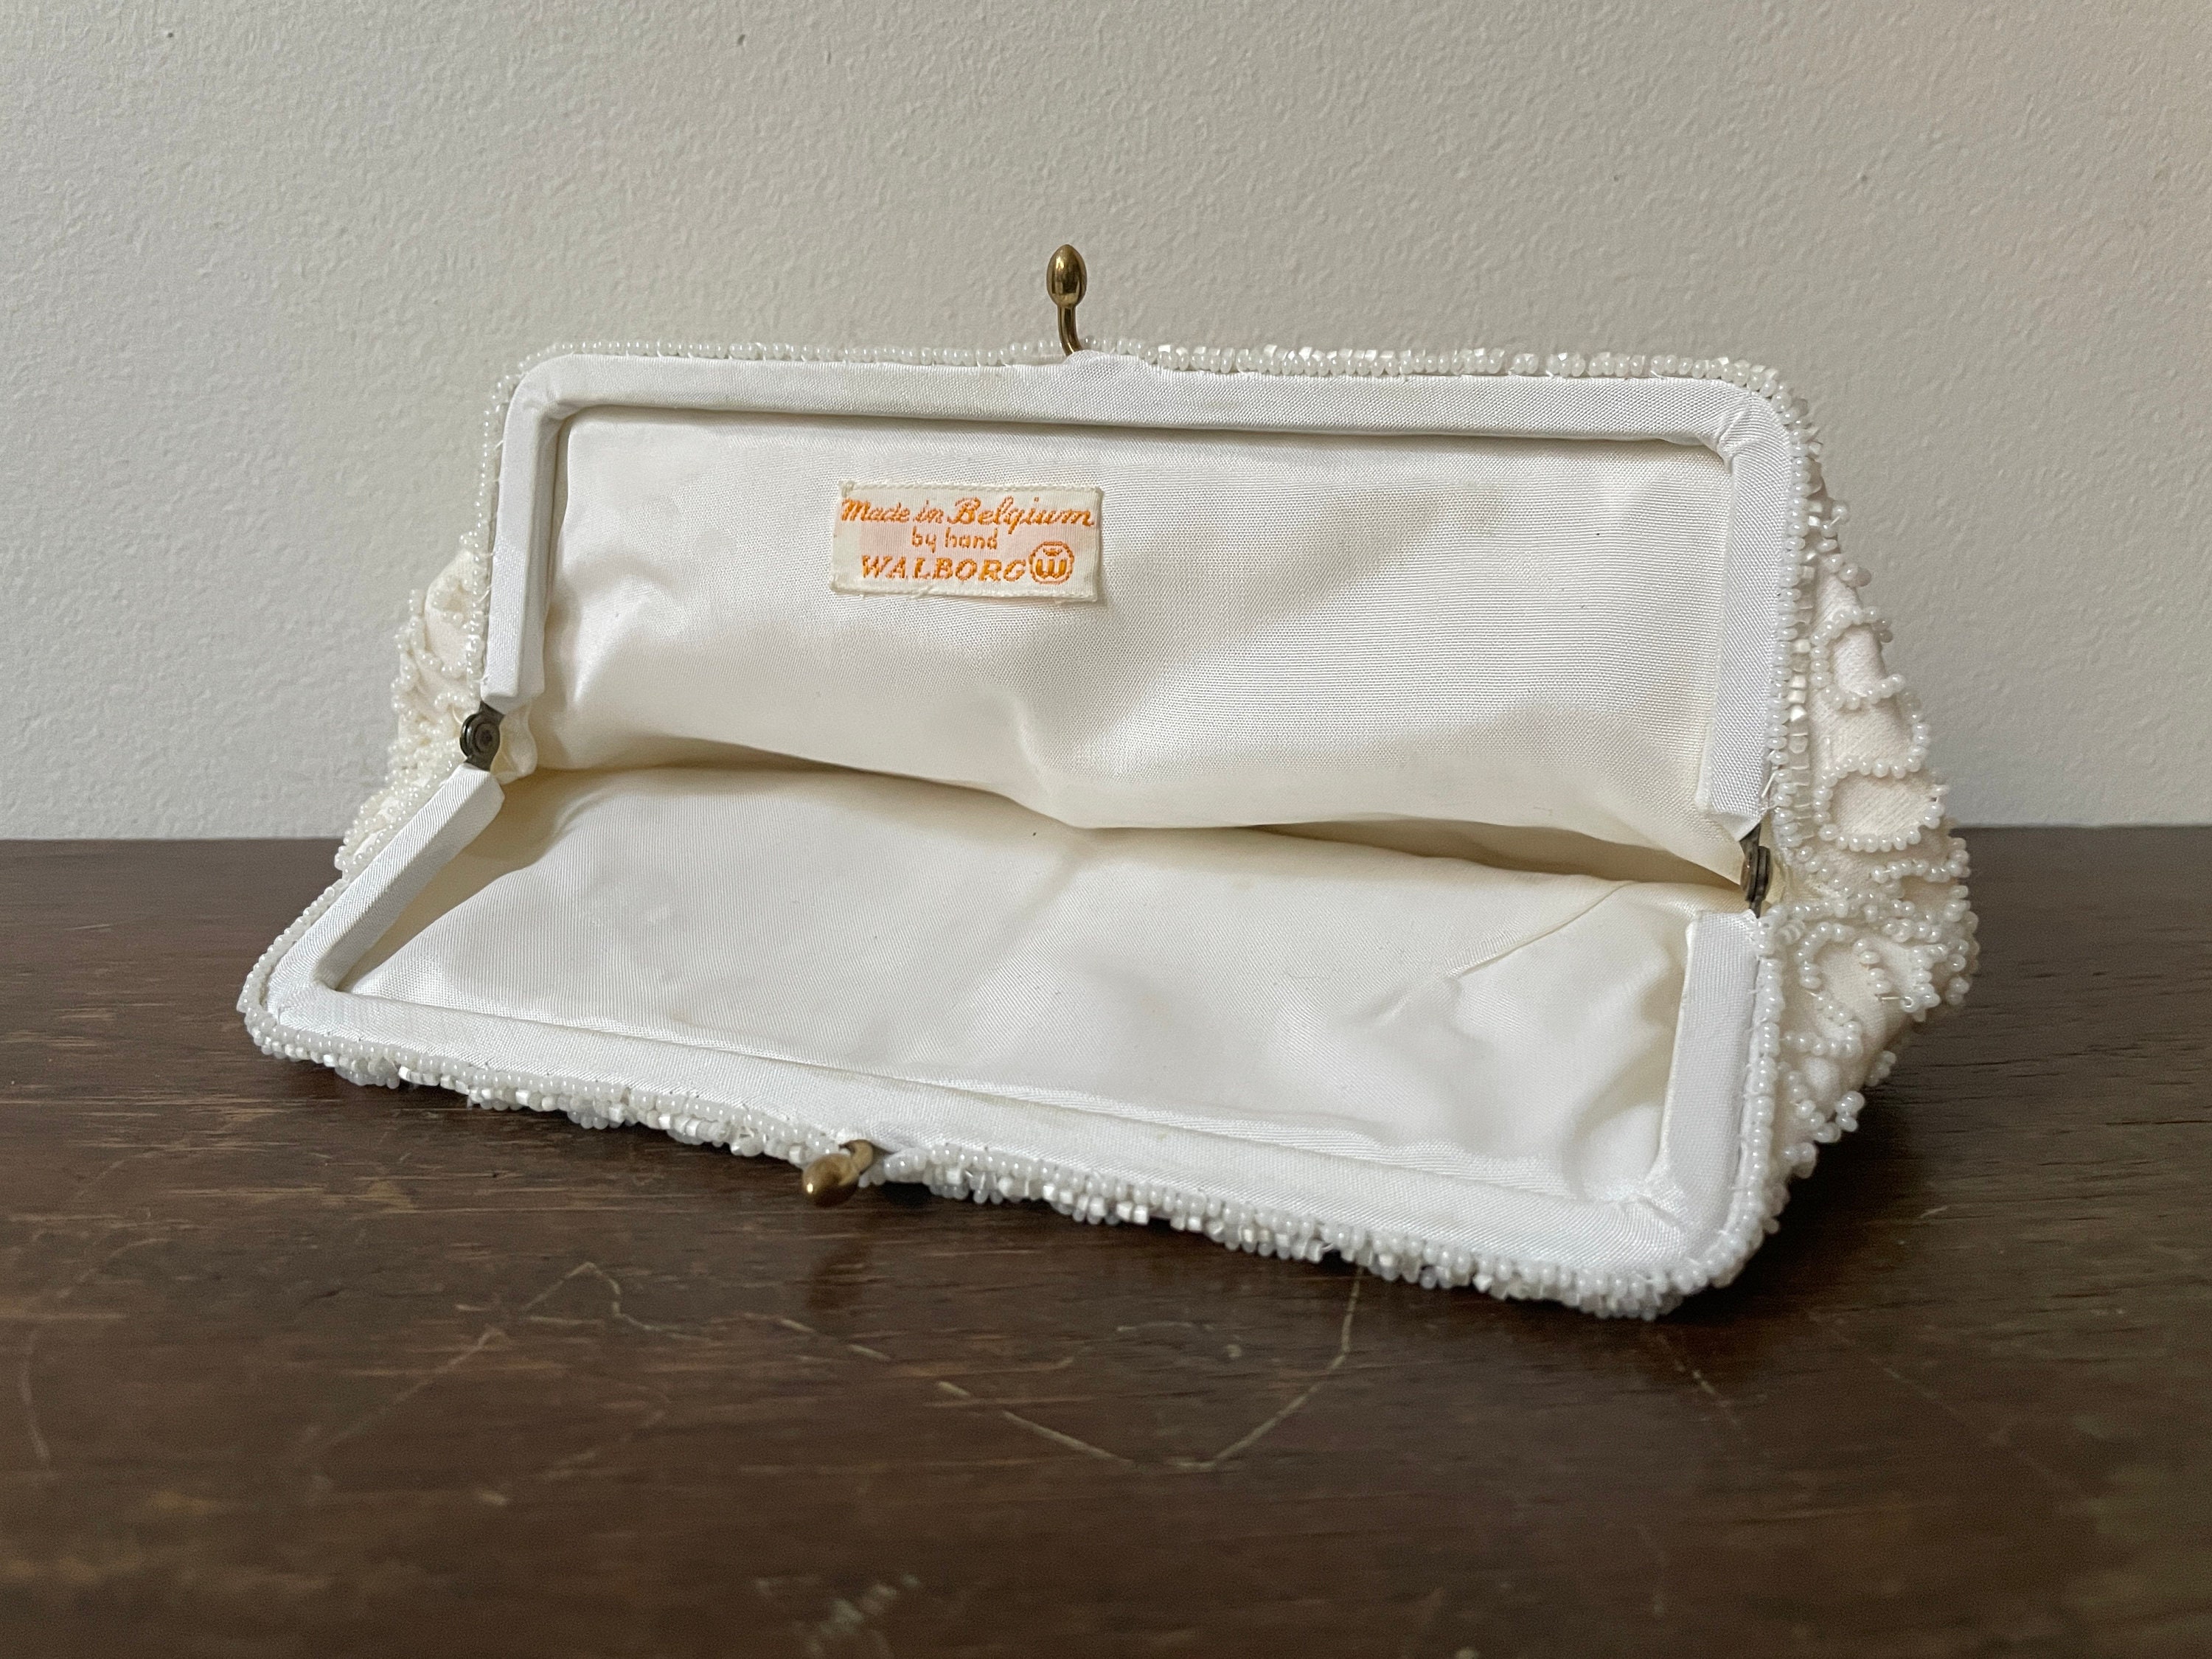 Buy the Vintage White Beaded Evening Purse Made in Korea